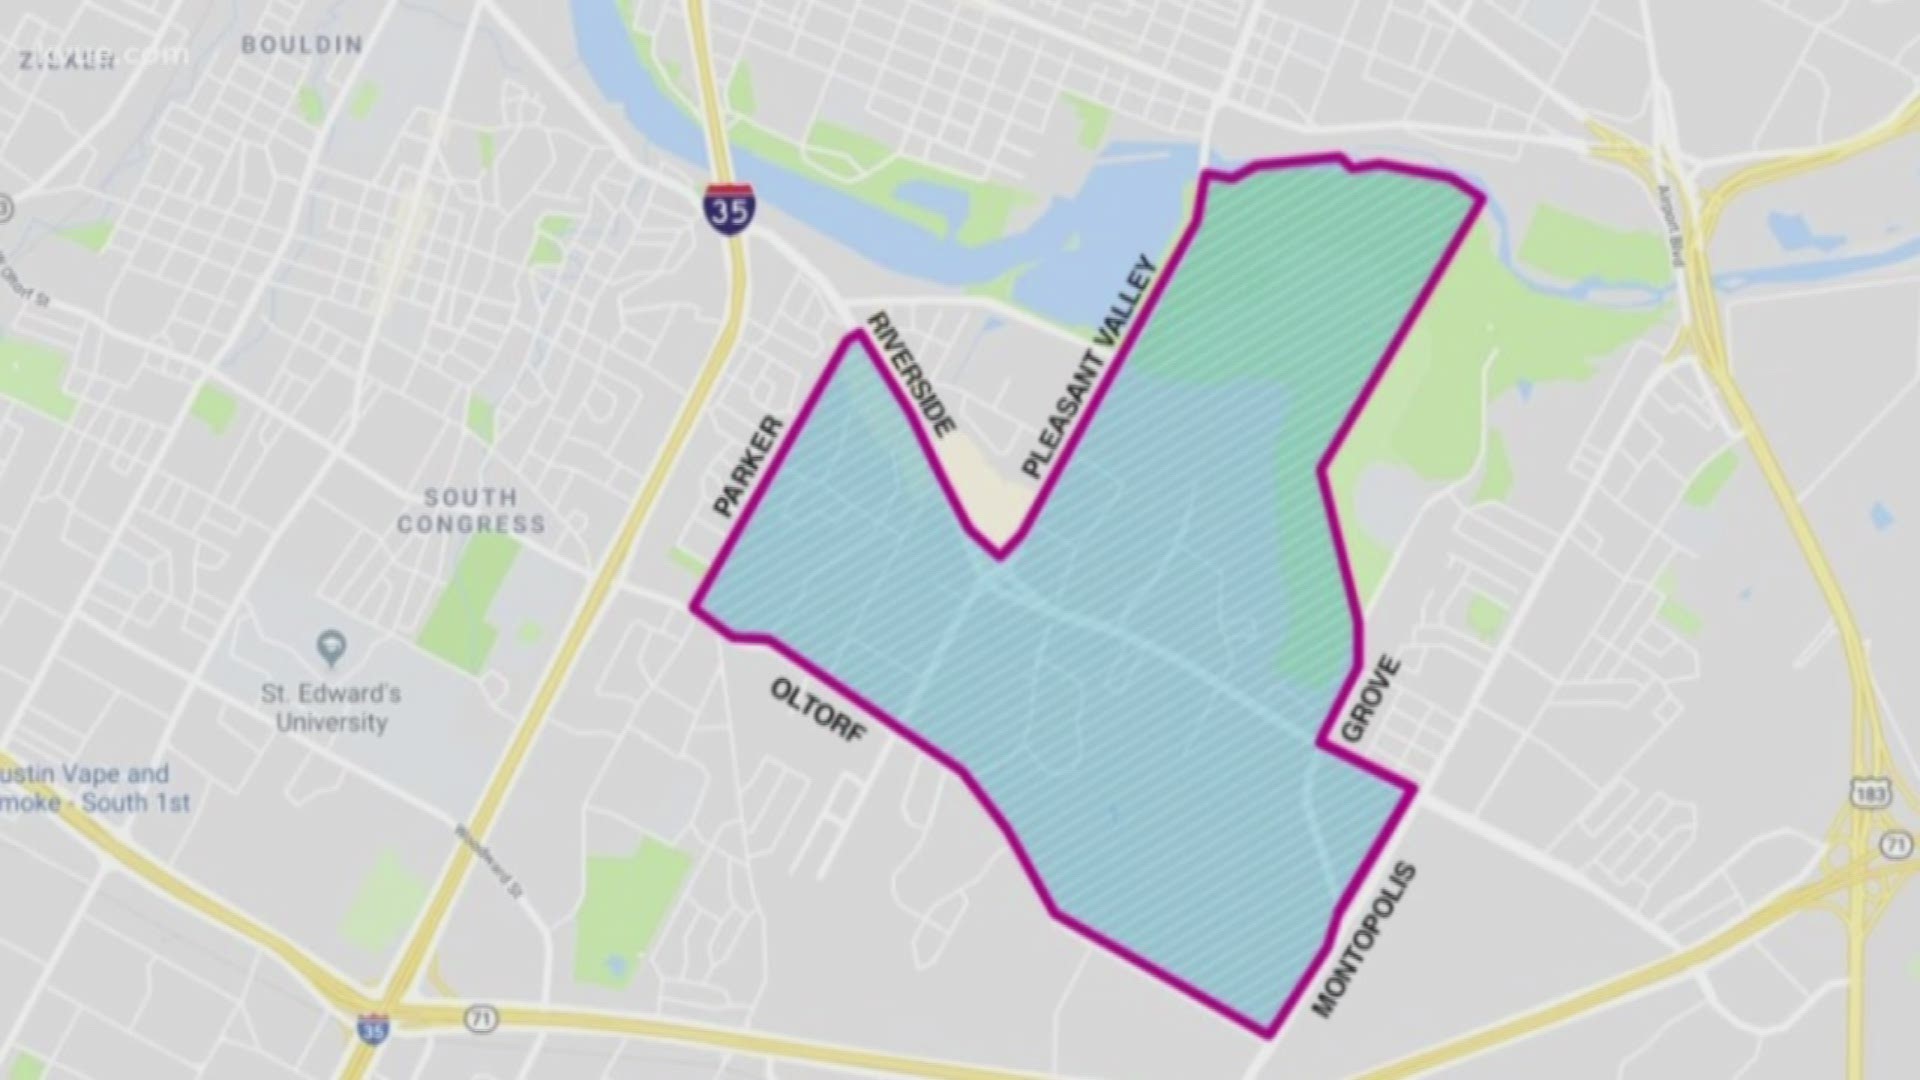 Austin police announced that they'll be trying something new to fix a two-square-mile area of Austin that sees an "inordinate amount of violent crime."